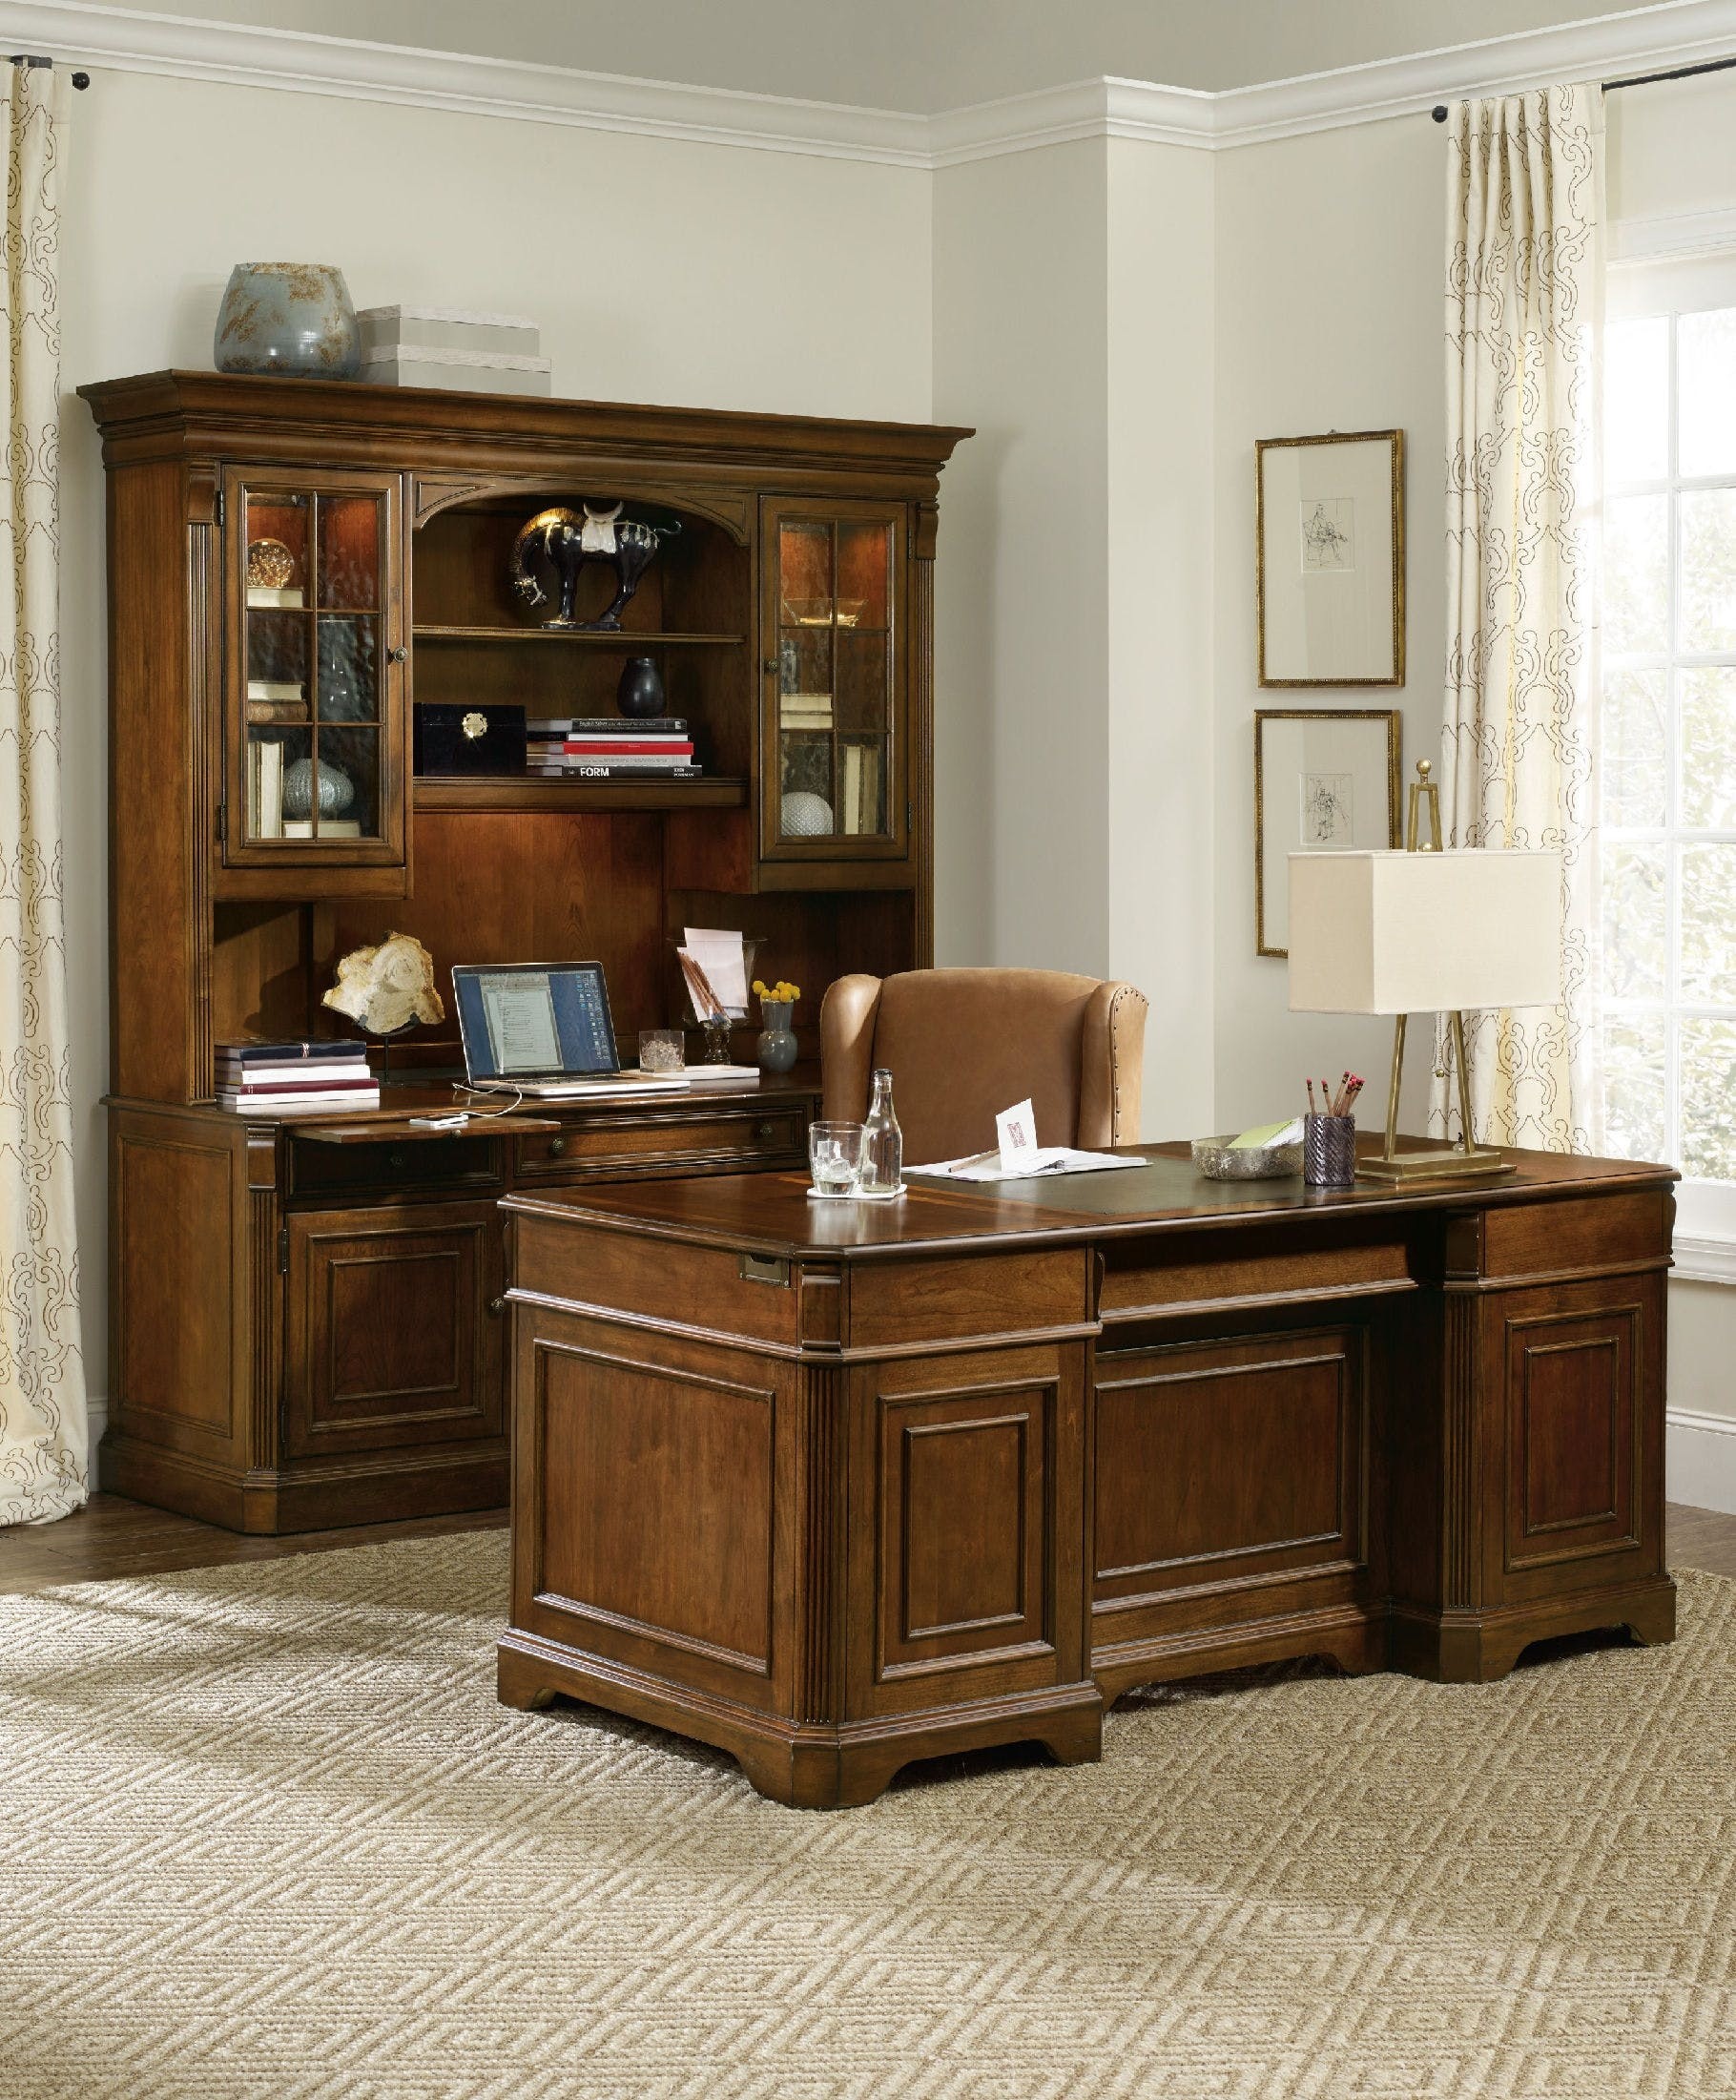 Brookhaven Collection Executive Desk #281-10-583, shown with matching computer credenza and hutch, each sold separately